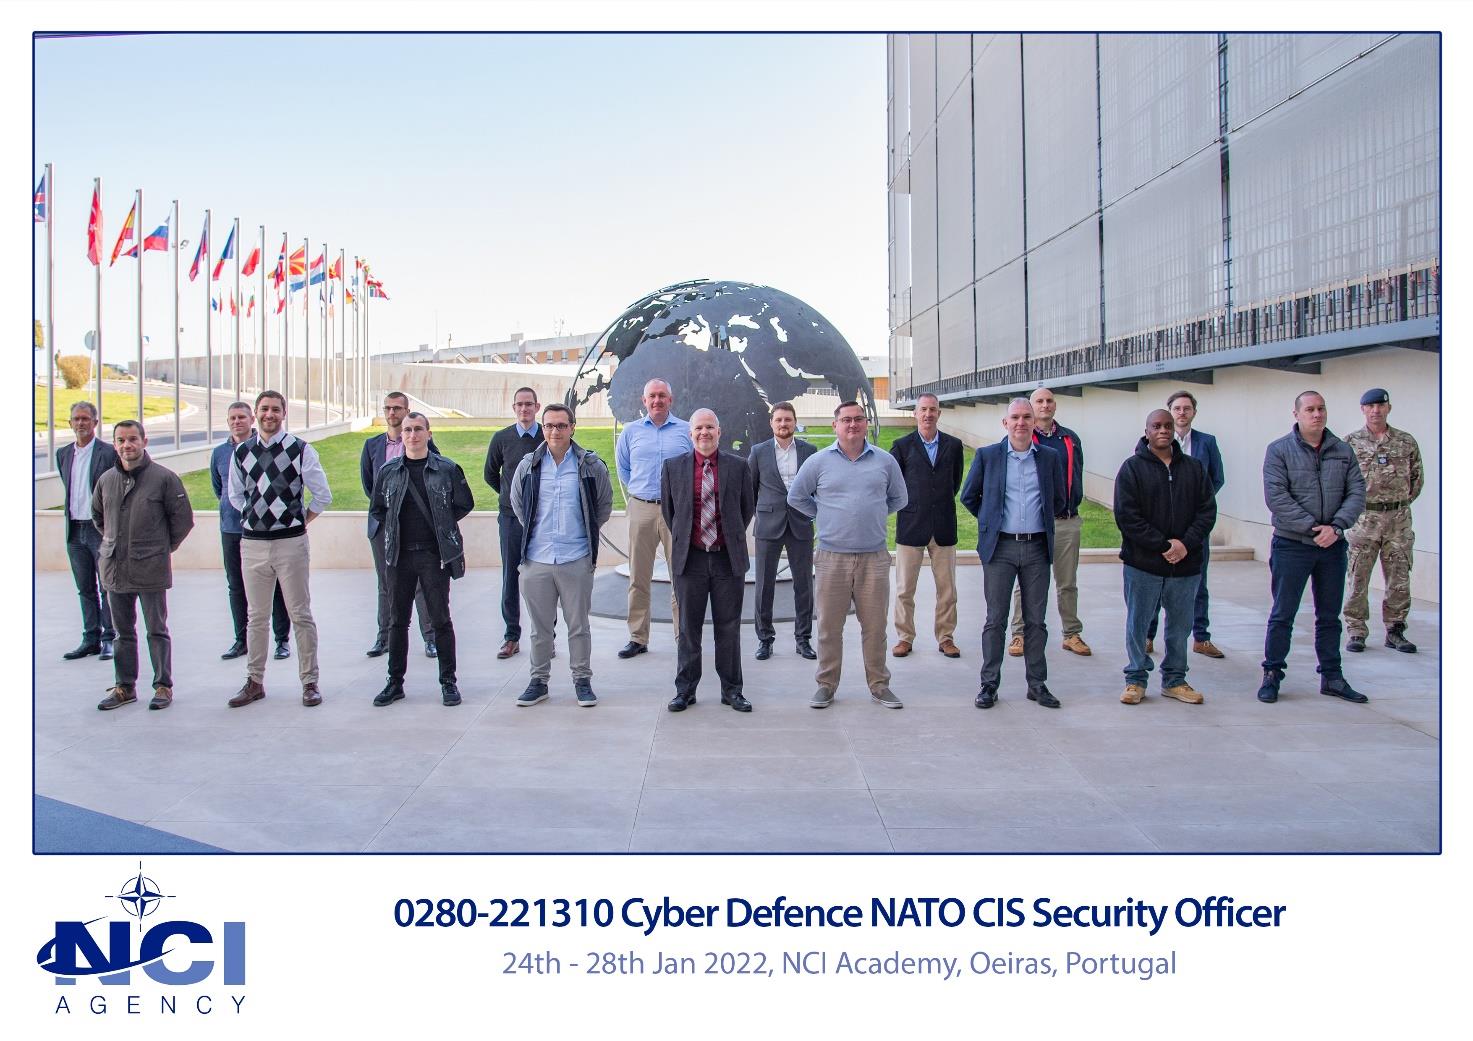 CYBER DEFENCE NATO CIS SECURITY OFFICER COURSE